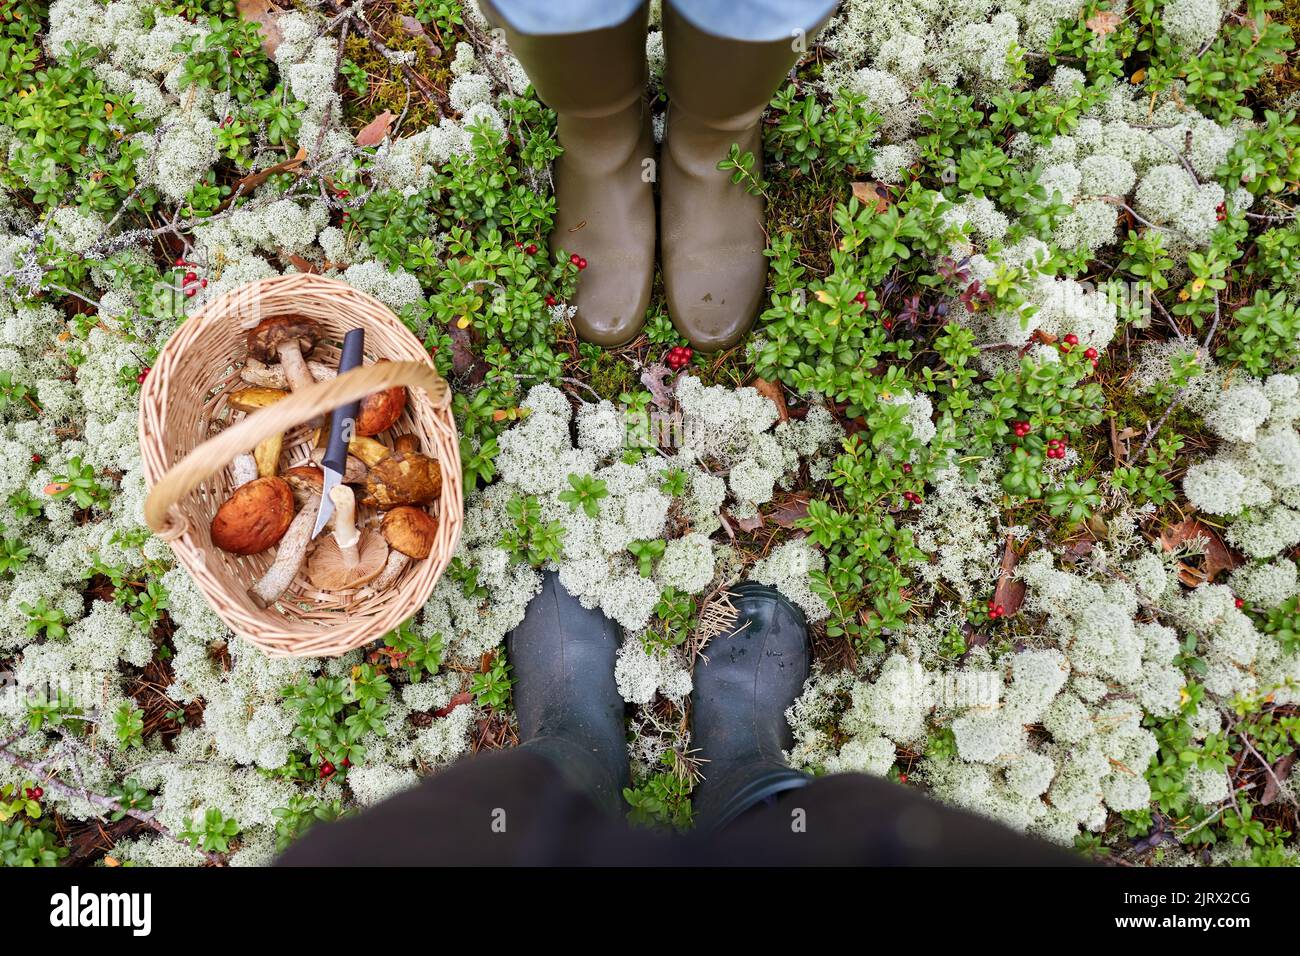 legs in rubber boots and mushroom basket in forest Stock Photo